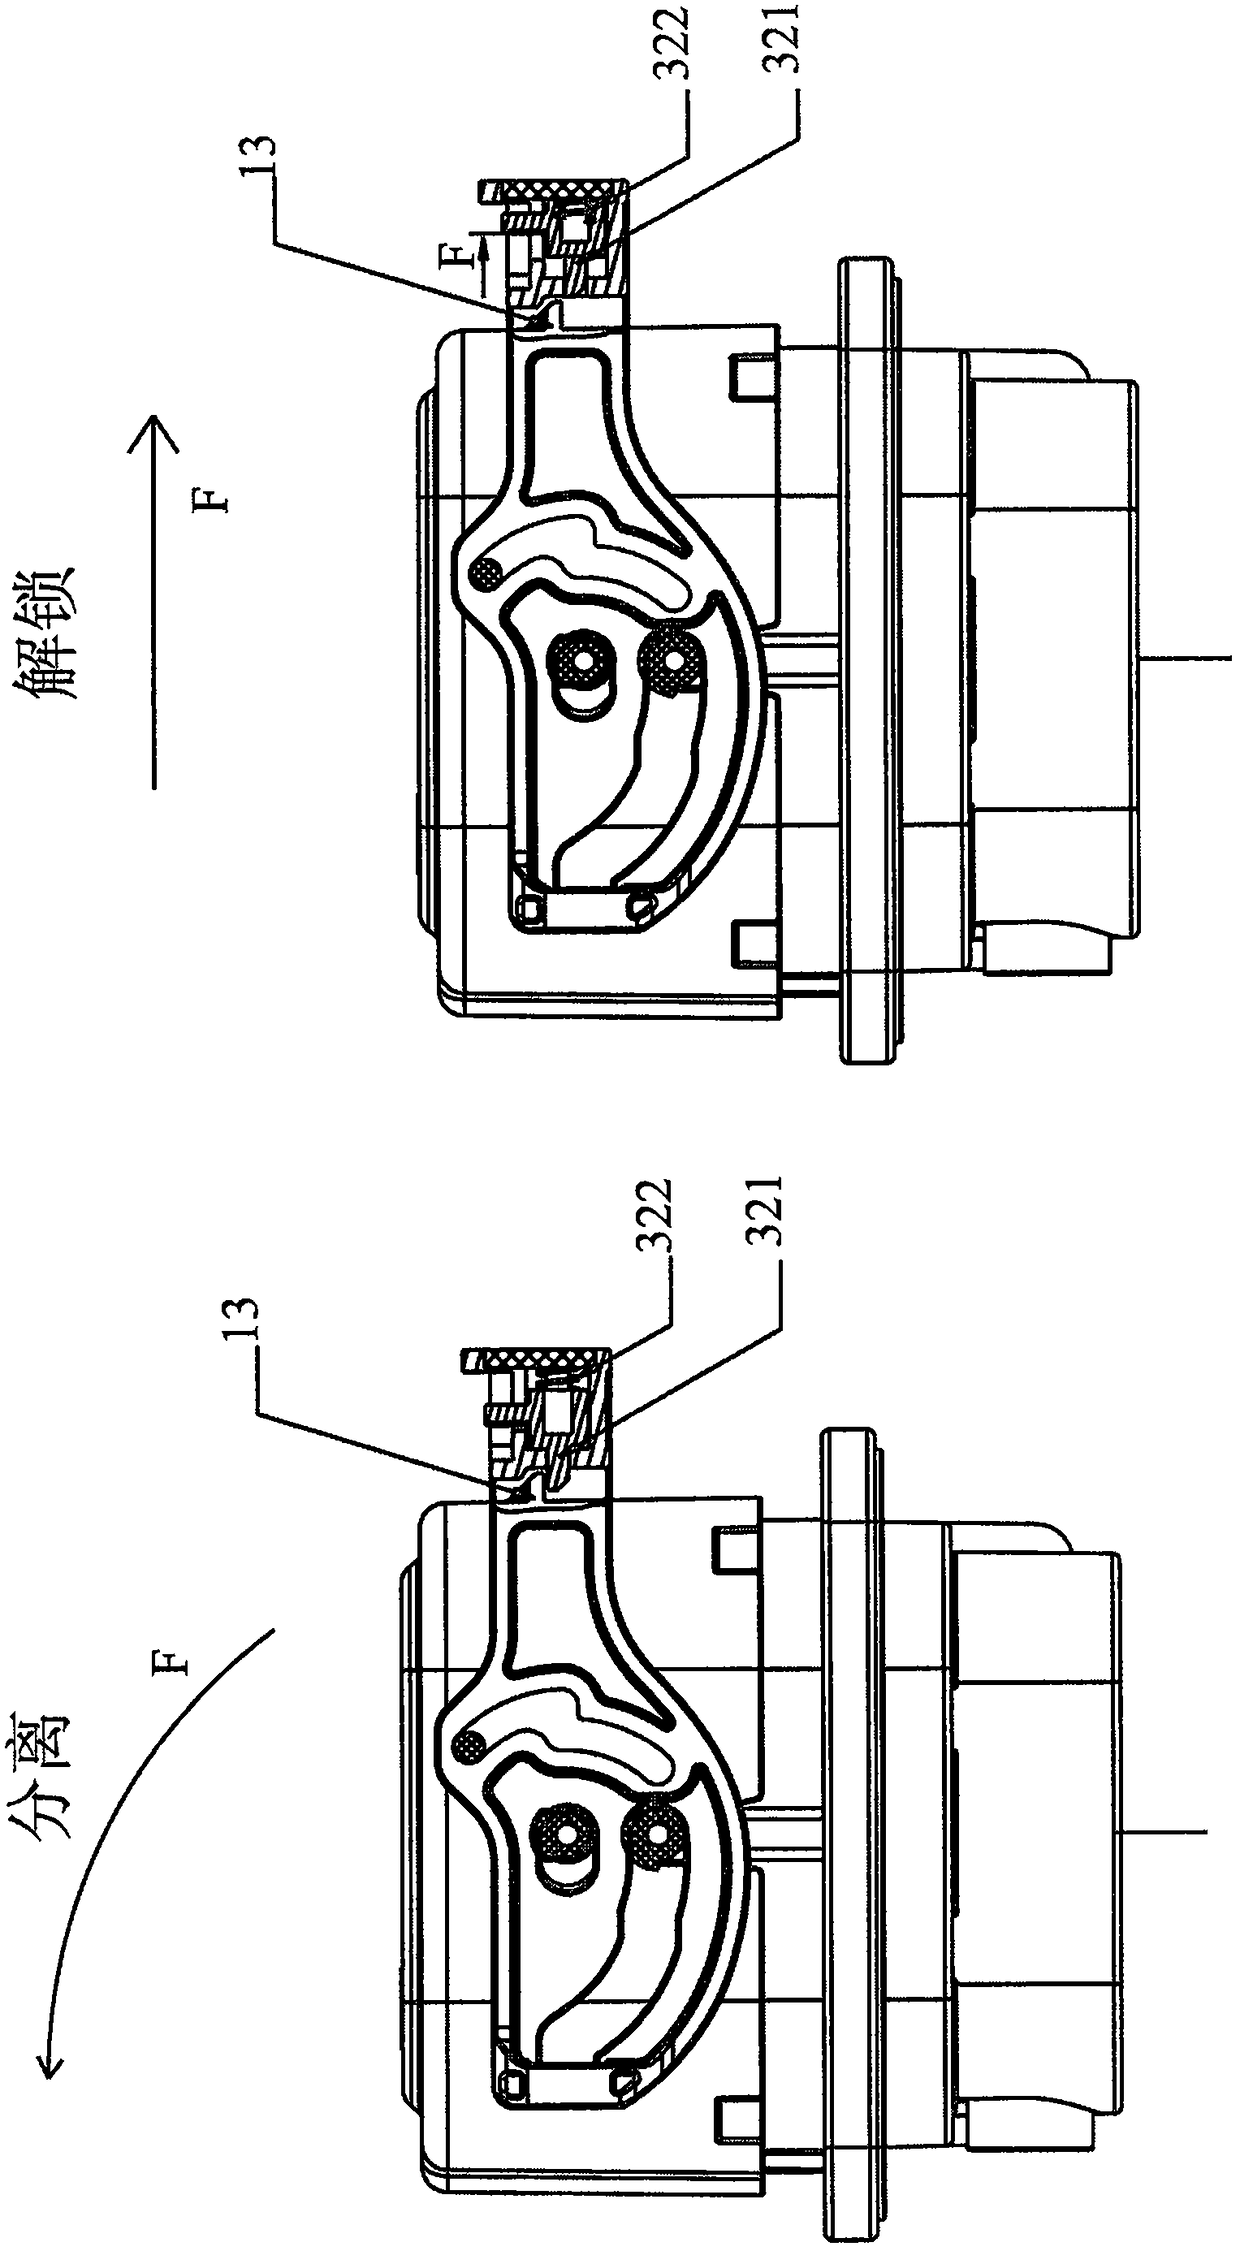 A step-by-step locking device for electric vehicle connector plug